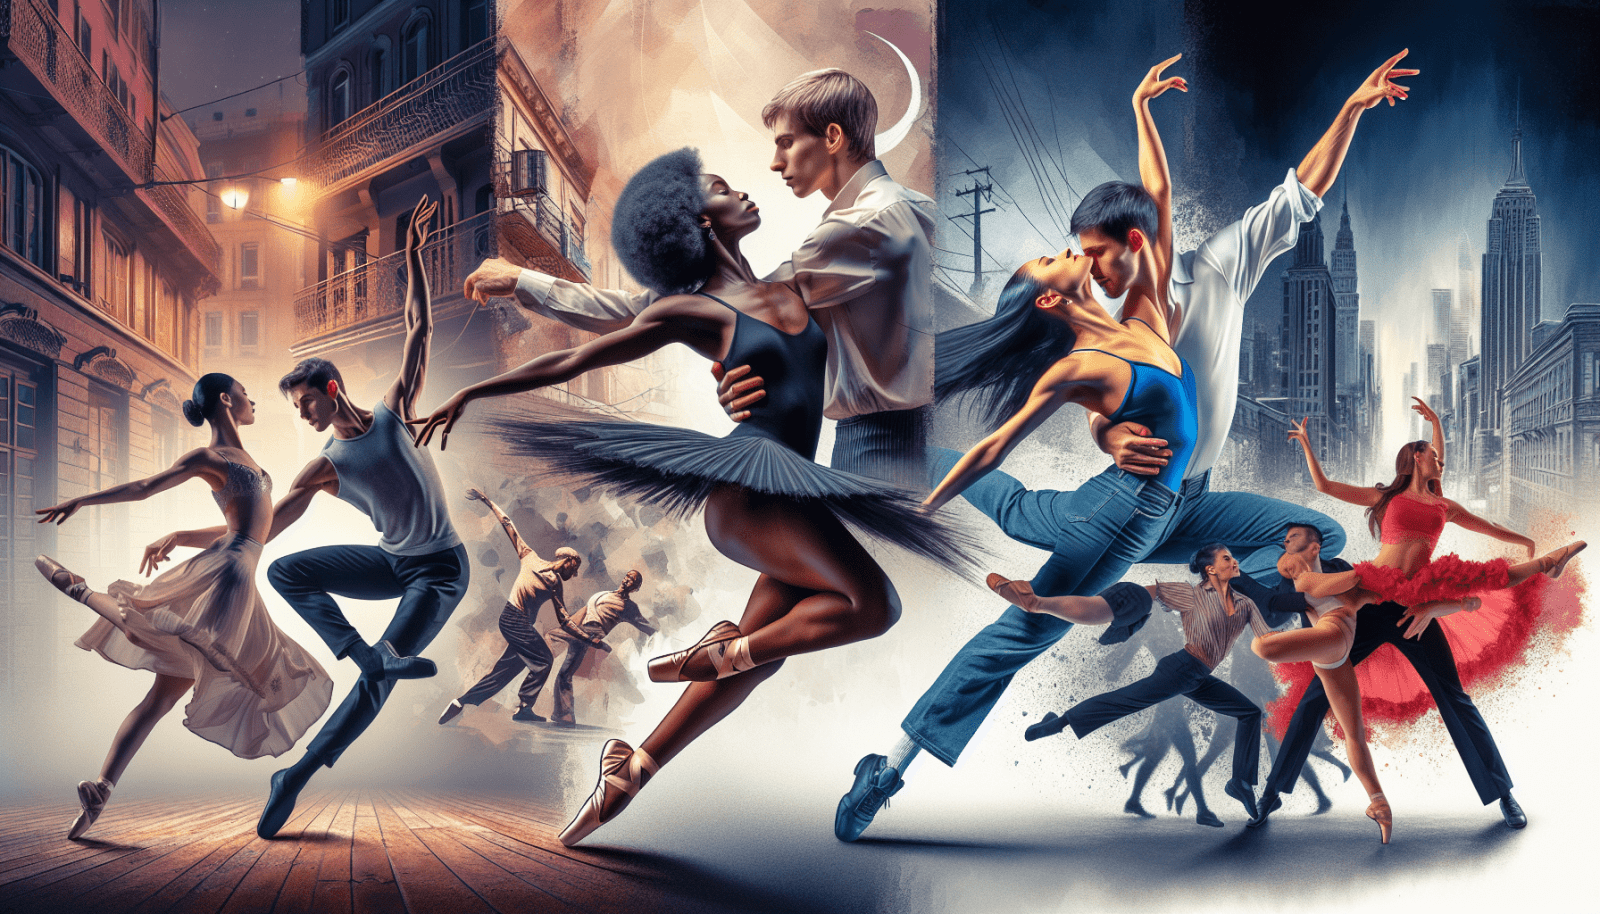 An artistic collage of various dance duos in dynamic poses, set against a backdrop of stylized cityscapes, merging classical ballet and modern dance elements.